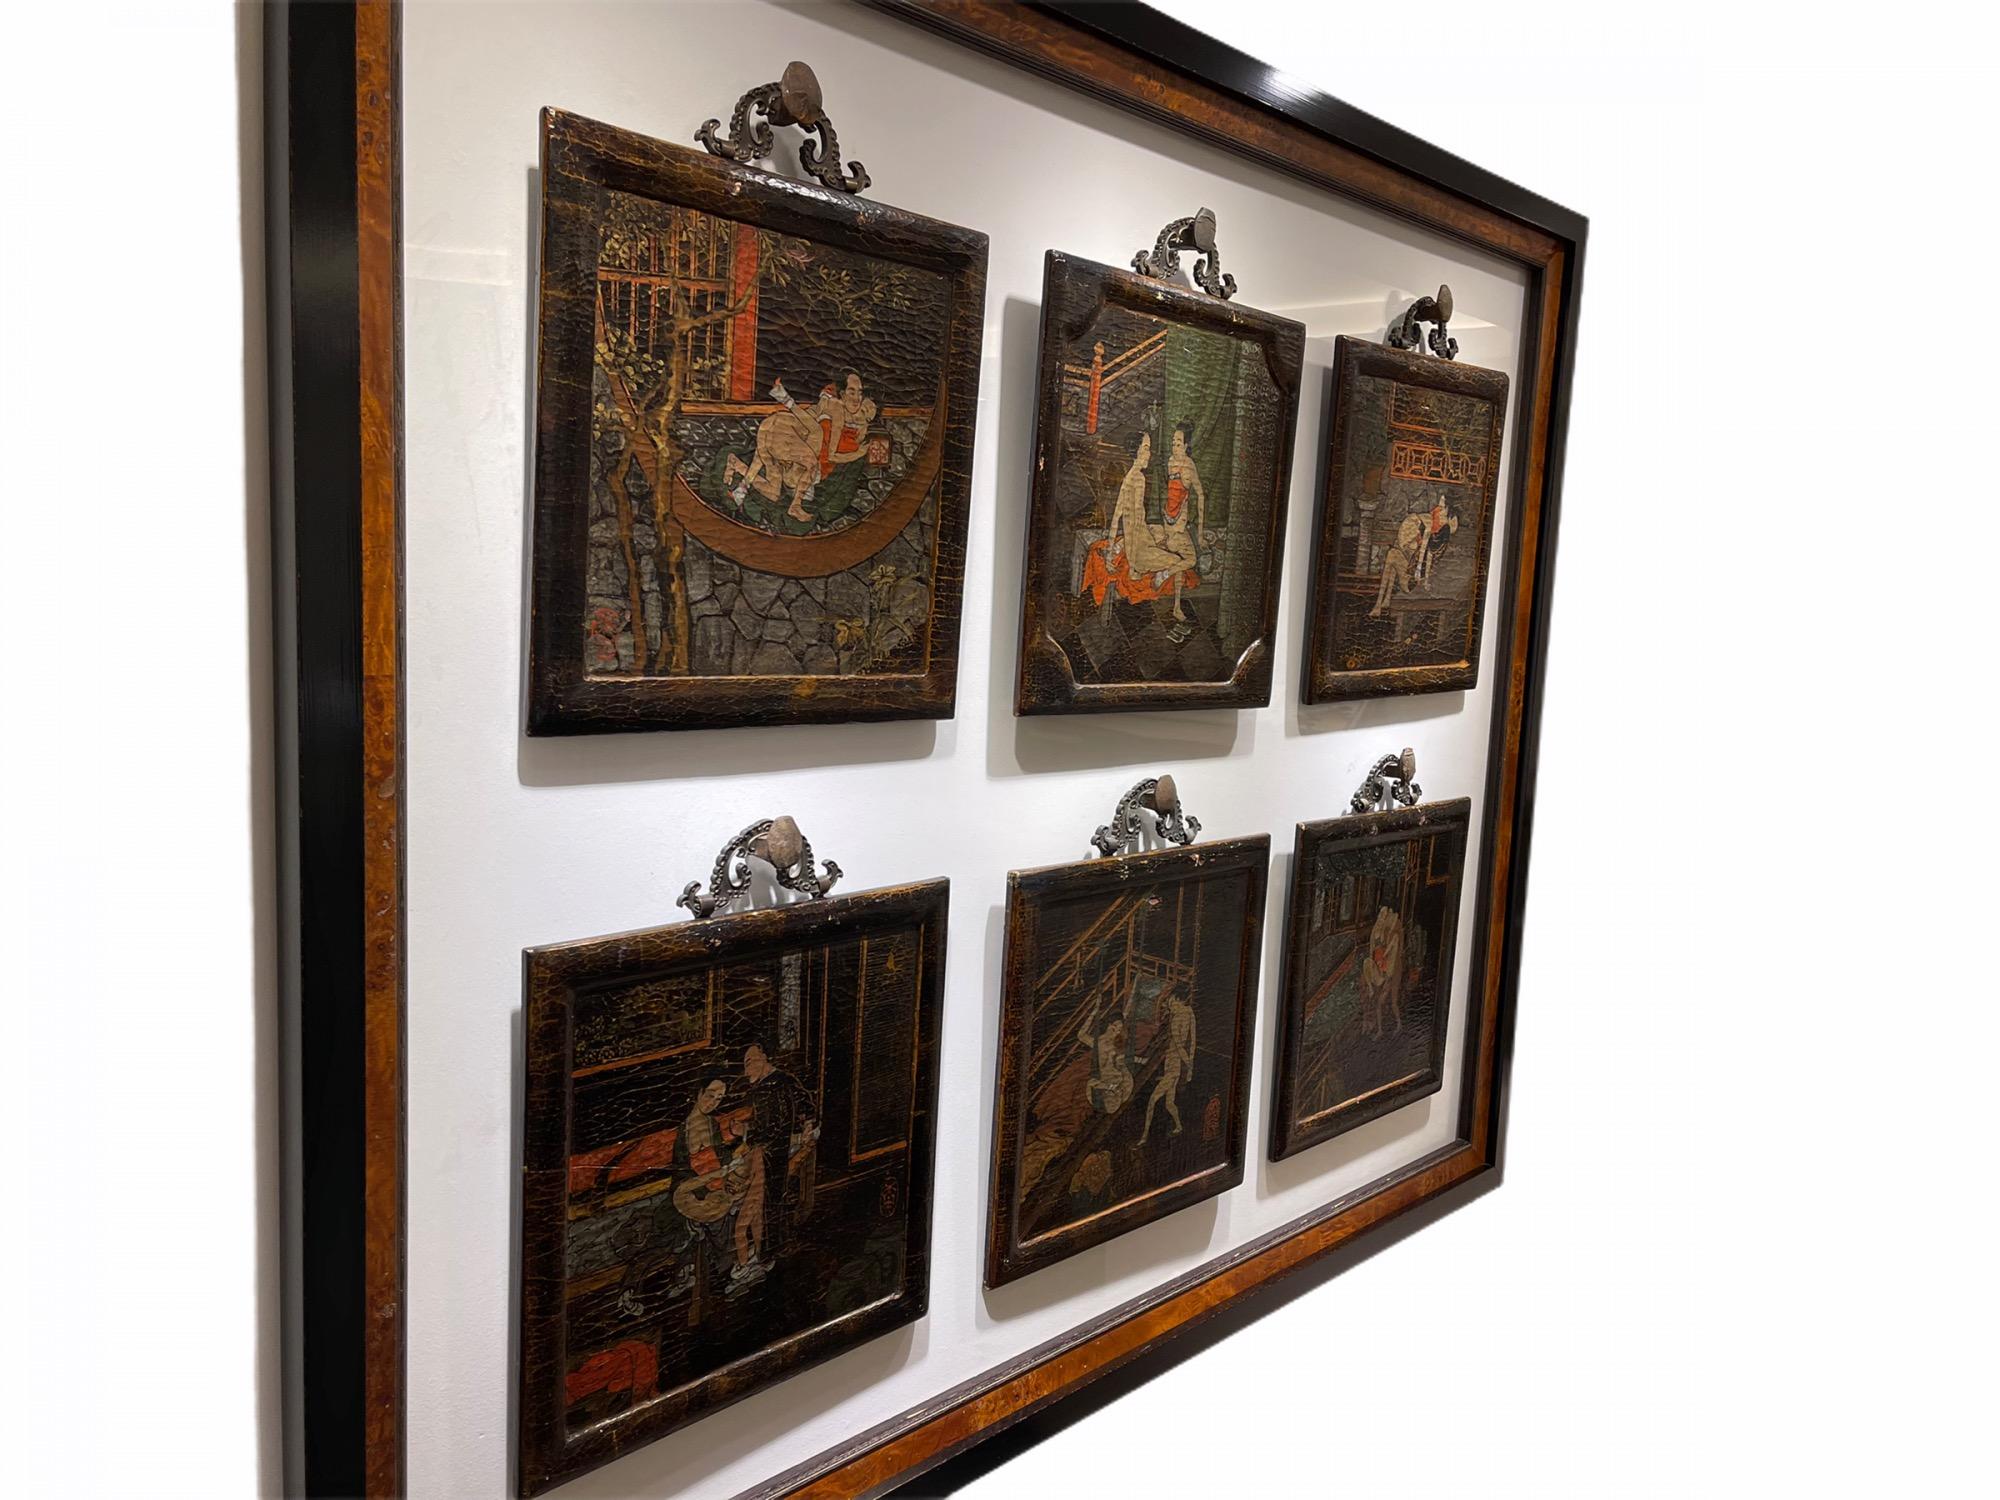 These magnificent lacquered wood panels have been mounted together on a lucite panel. Each panel has its original hanging handle. The panels are hanging on antique railroad pins that have been cut and attached to the lucite panel. It has been framed